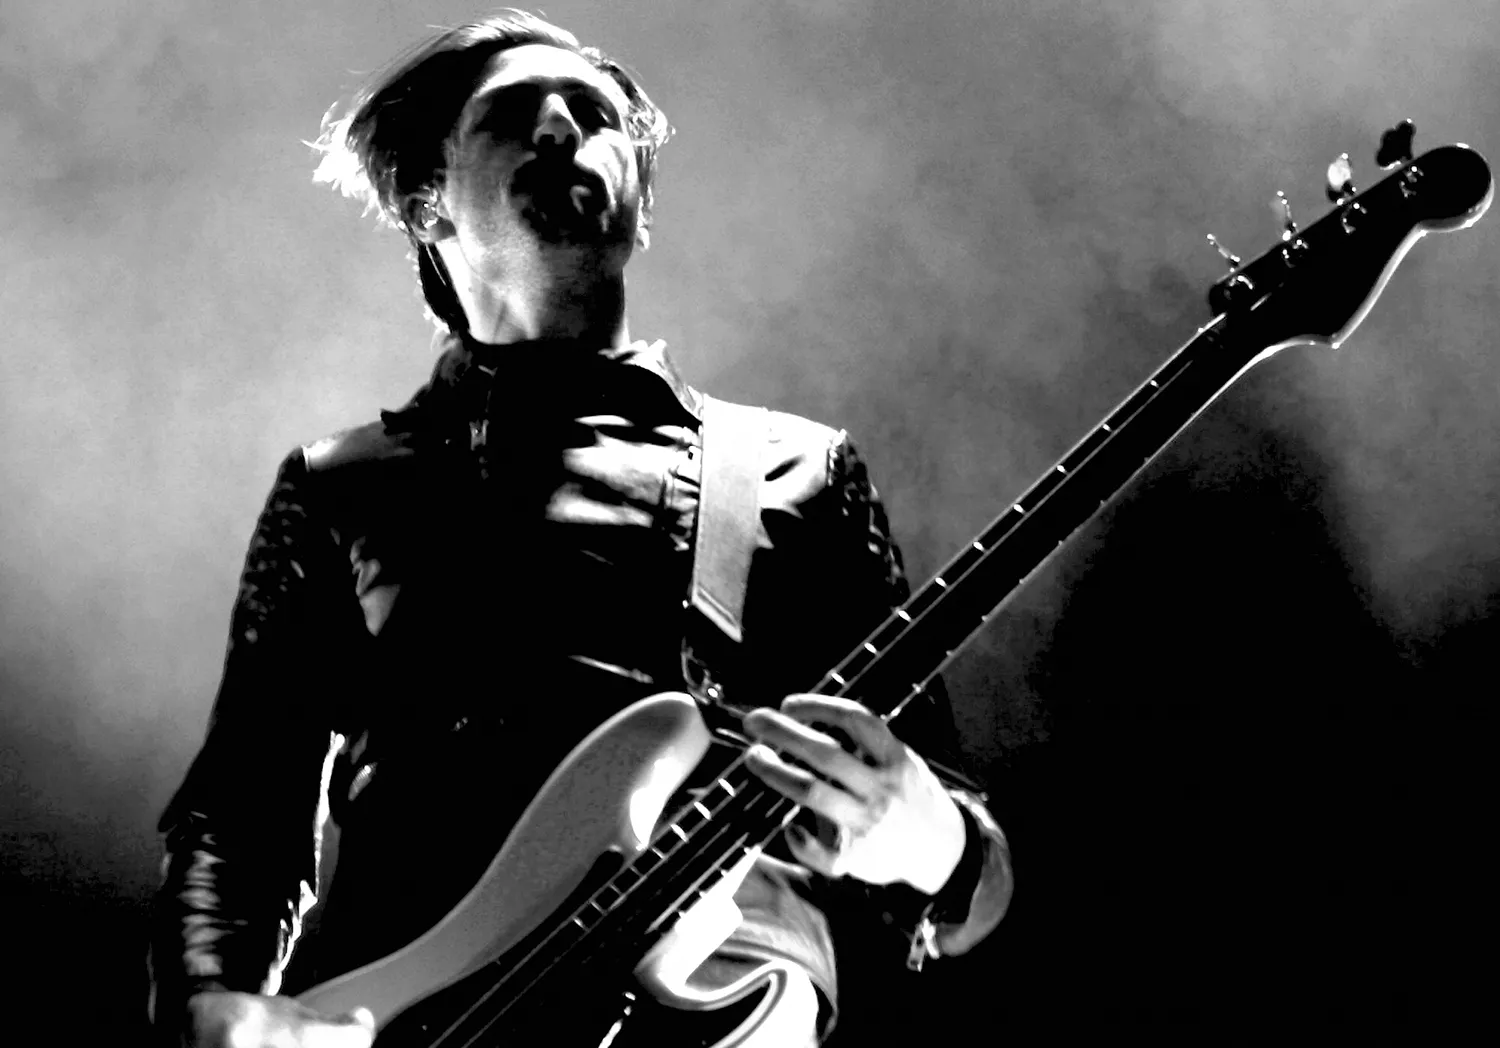 Queens of the Stone Age vender plader i Aarhus